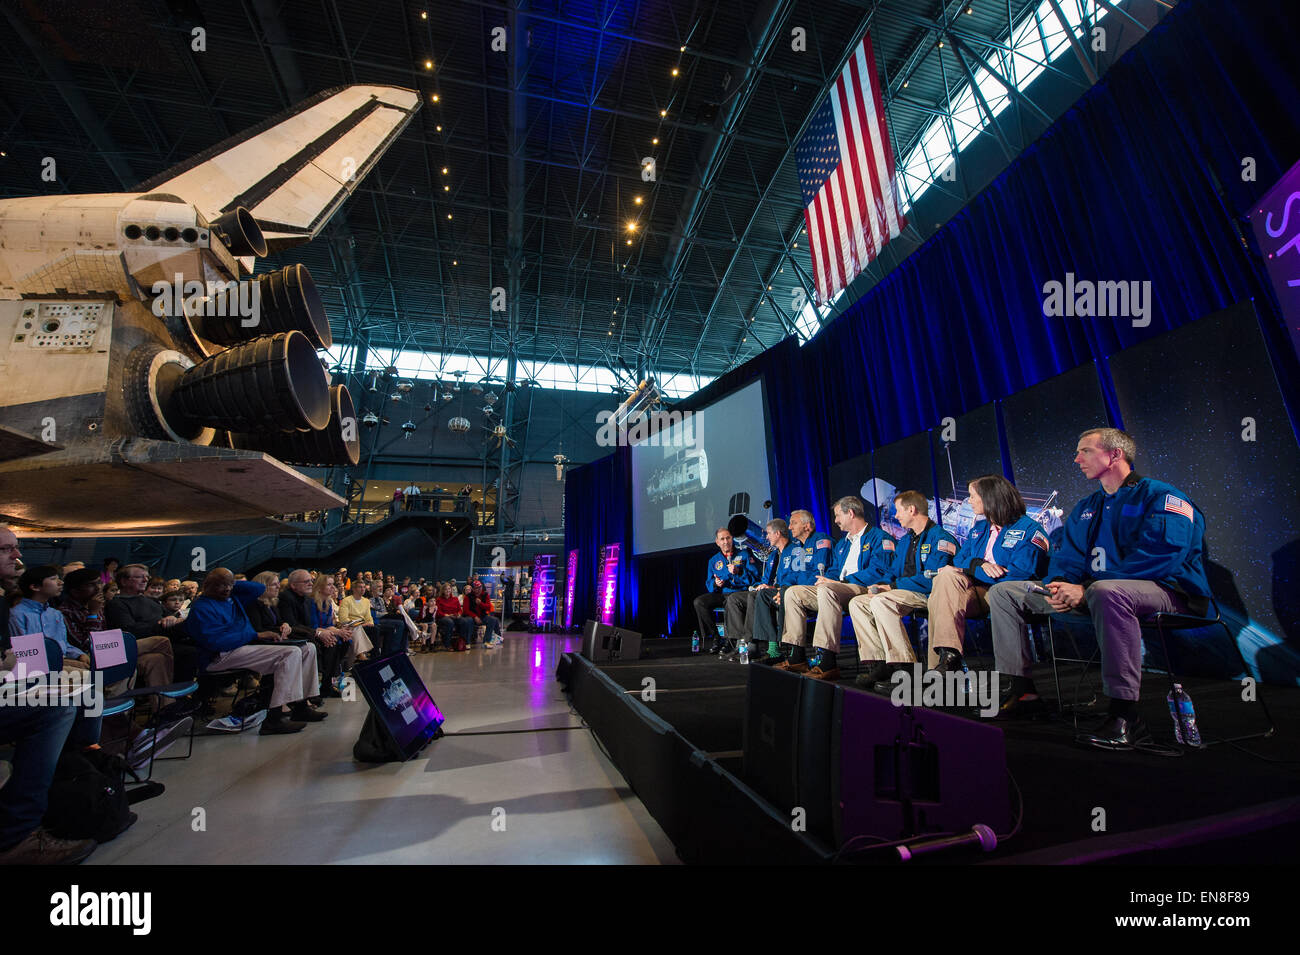 The crew of STS-125, the final Hubble Servicing Mission, participate in a panel discussion as part of an event celebrating the 25th Anniversary of the Hubble Space Telescope, Saturday, April 25, 2015 at the Smithsonian's Steven F. Udvar-Hazy Center in Chantilly, Va.  From left: former NASA astronauts John Grunsfeld, Michael T. Good, Mike Massimino, Scott Altman, Gregory C. Johnson, and current NASA astronauts Megan McArthur Behnken and Andrew Feustel. Stock Photo